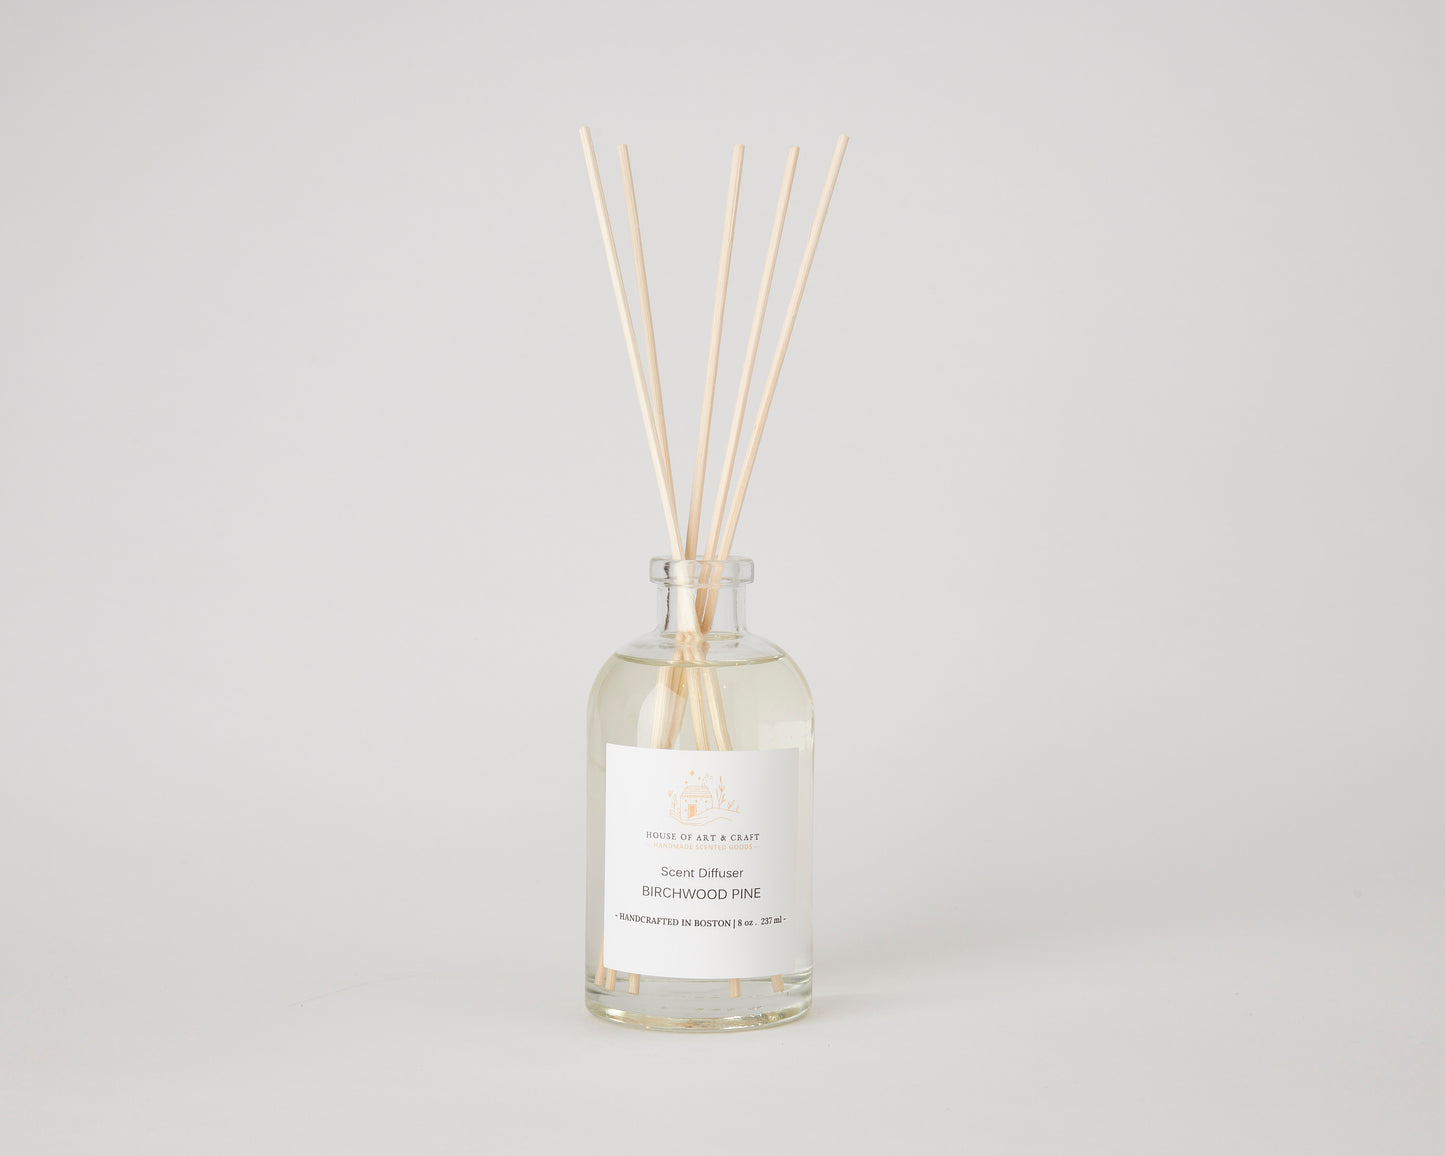 Rattan Reed Diffuser - Aromatherapy - Home Decor